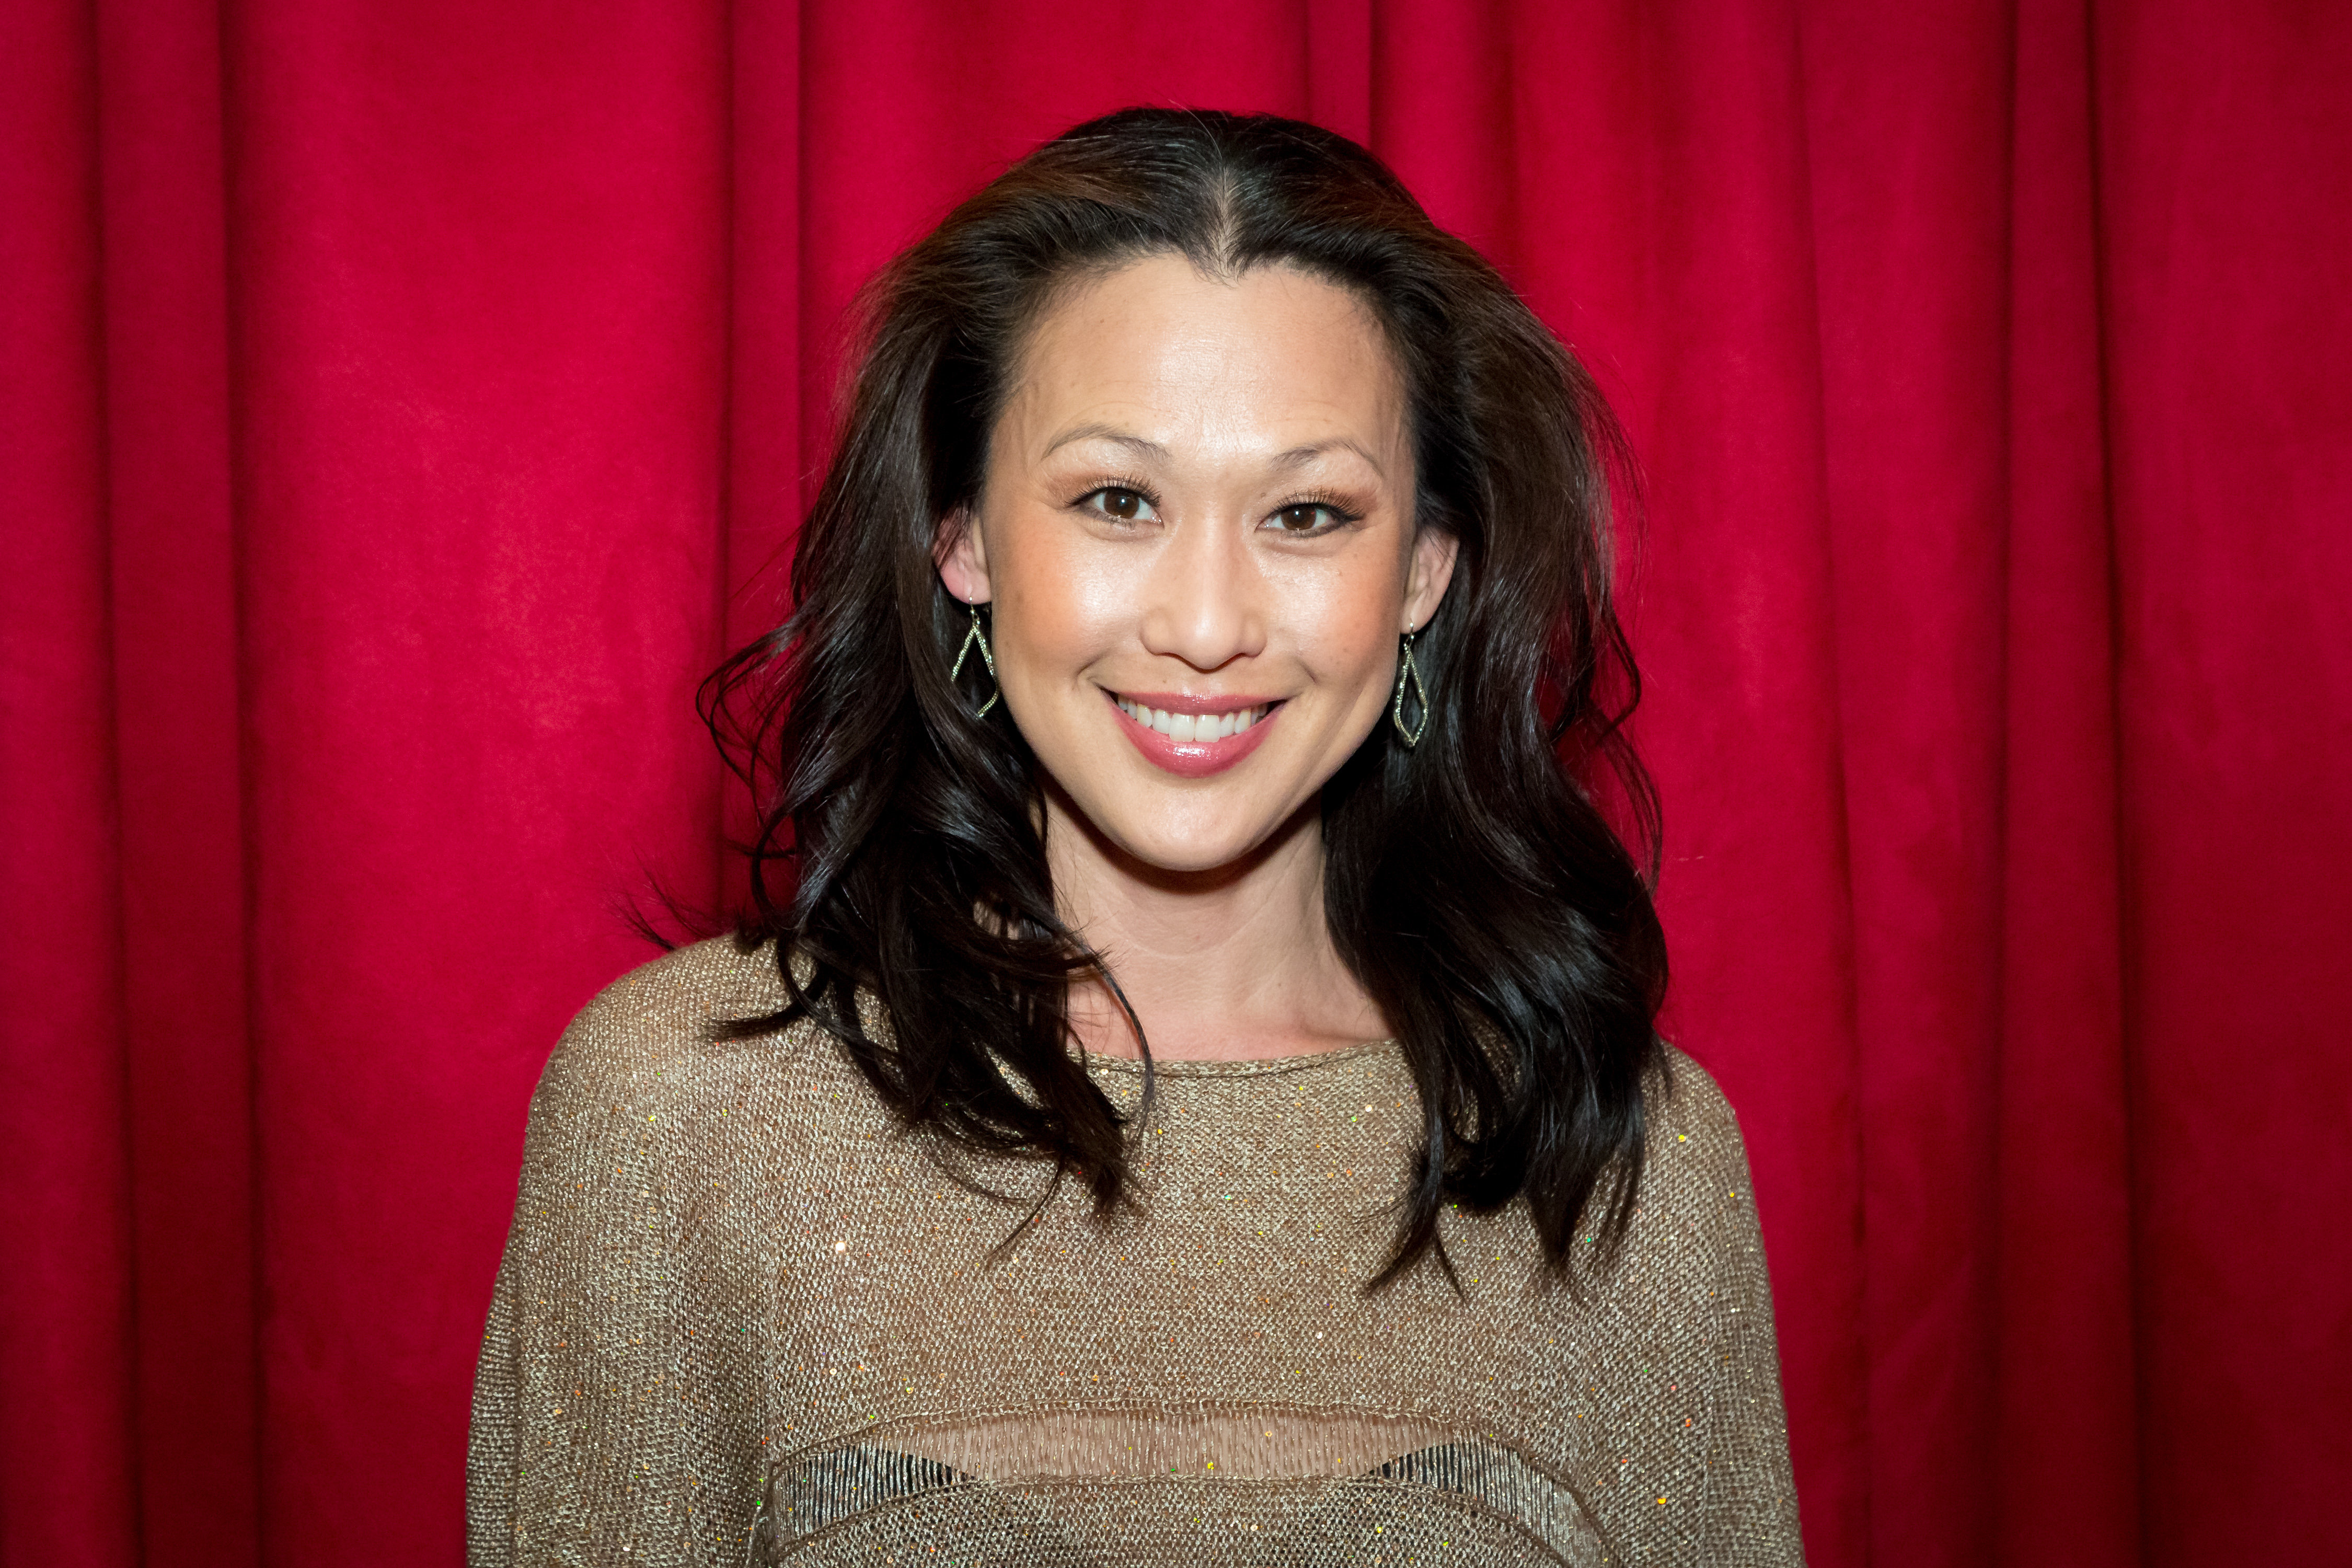 Nicole Bilderback, The Asian Friend Of 90s Teen Comedies, Is Ready To Kick Your Ass HuffPost Entertainment photo